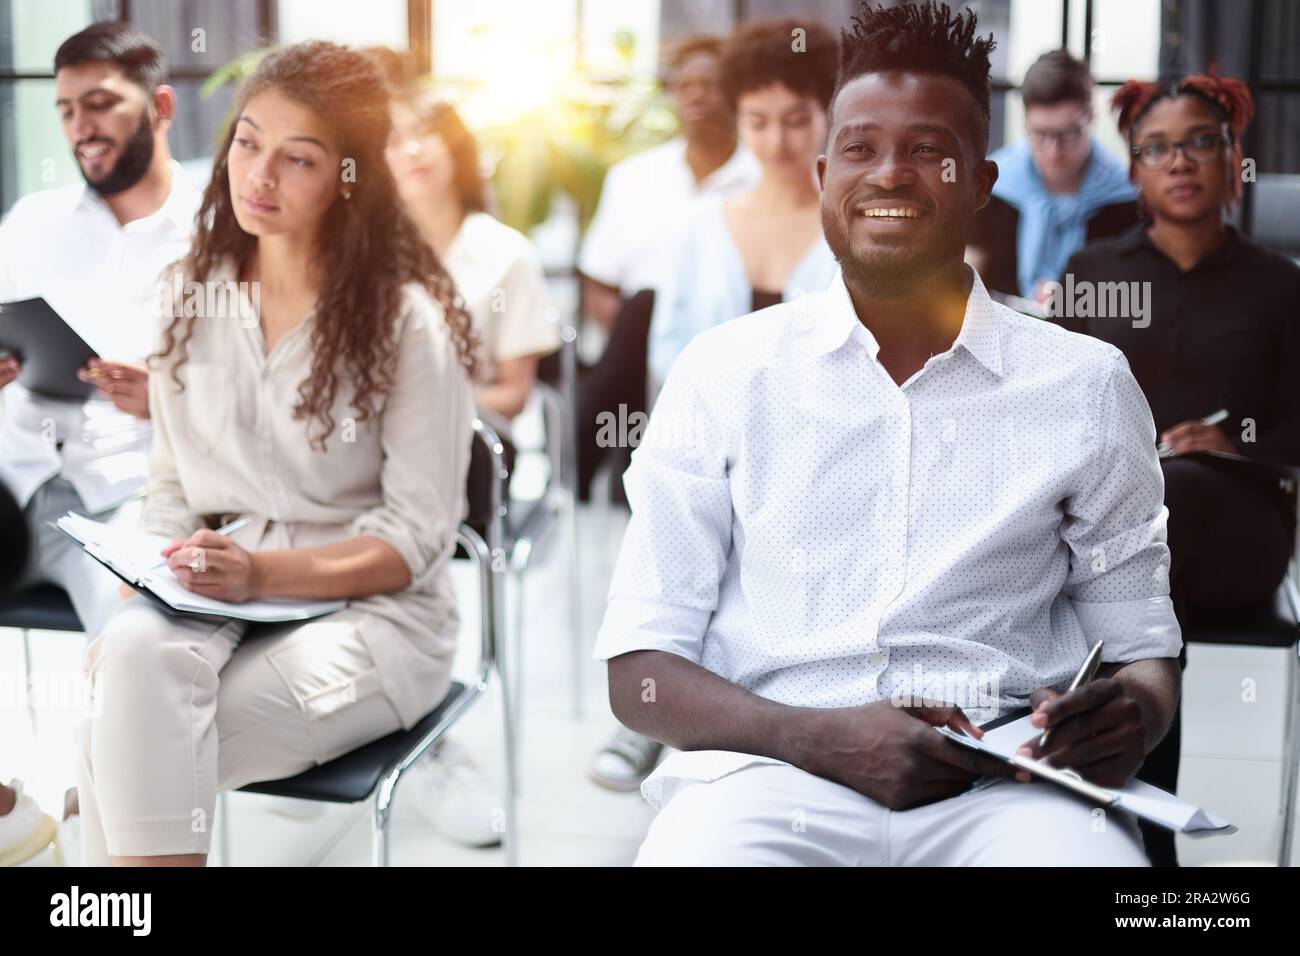 Audience at the conference hall. Business and Entrepreneurship concept. Focus on unrecognizable people in audience. Stock Photo